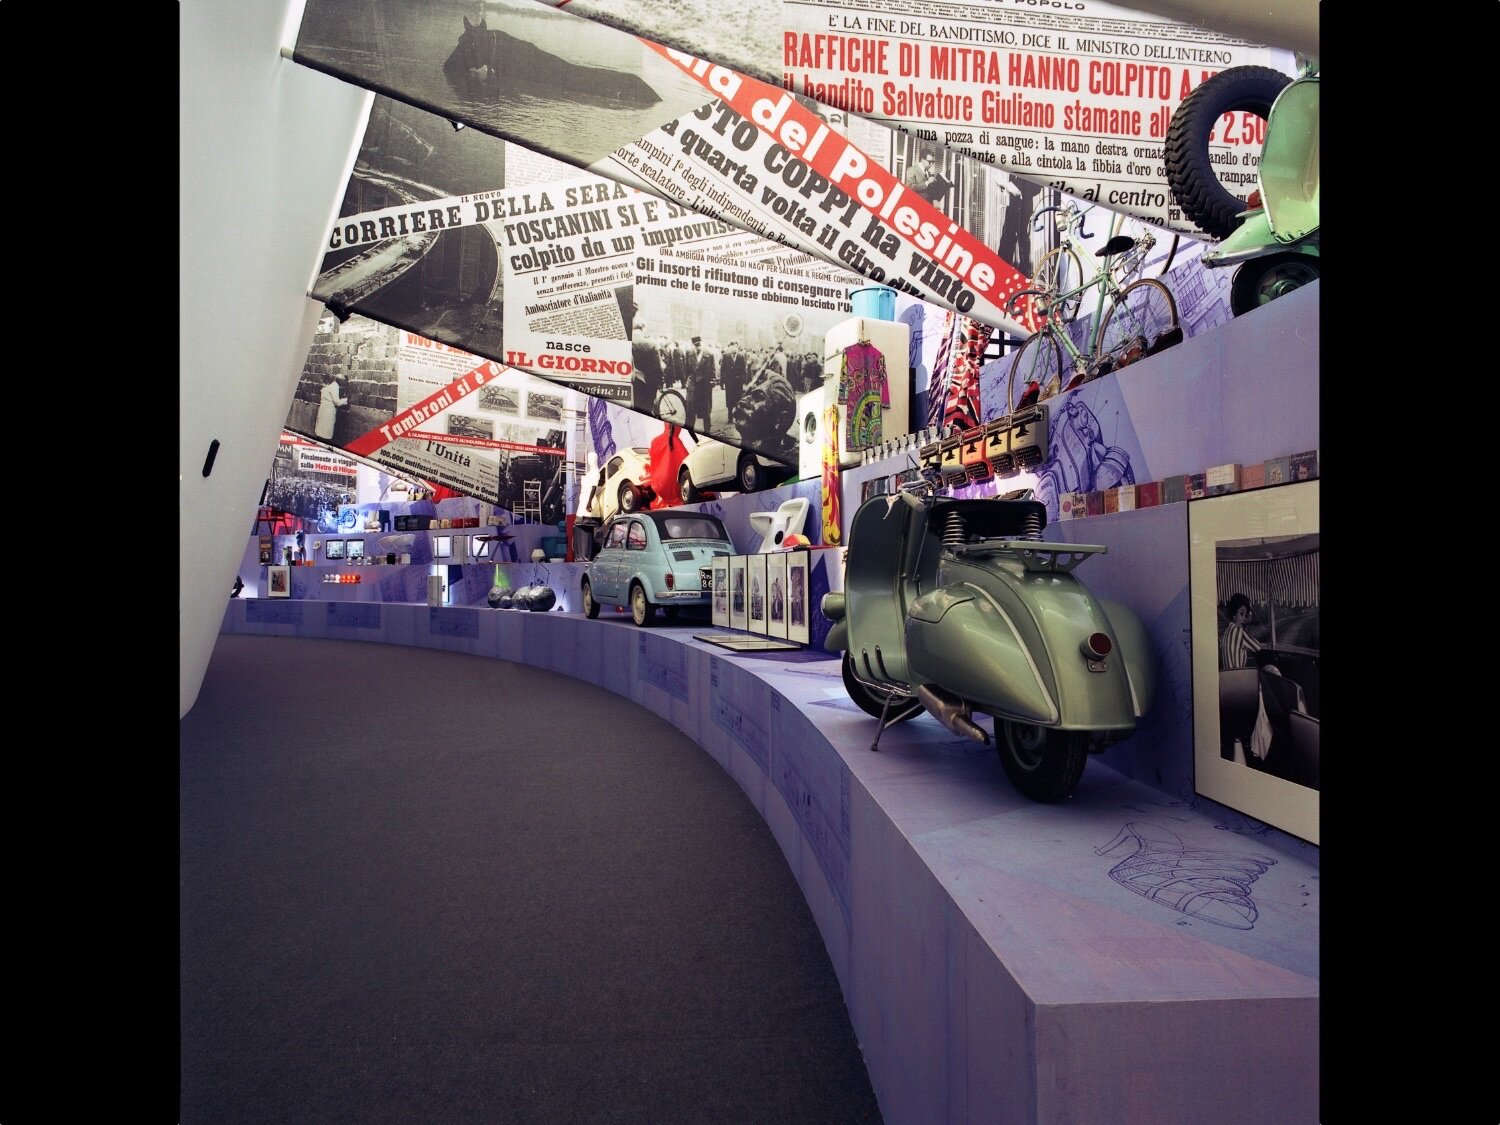  Made in Italy
Triennale di Milano
Milan, 2001
photo courtesy of Change Performing Arts 